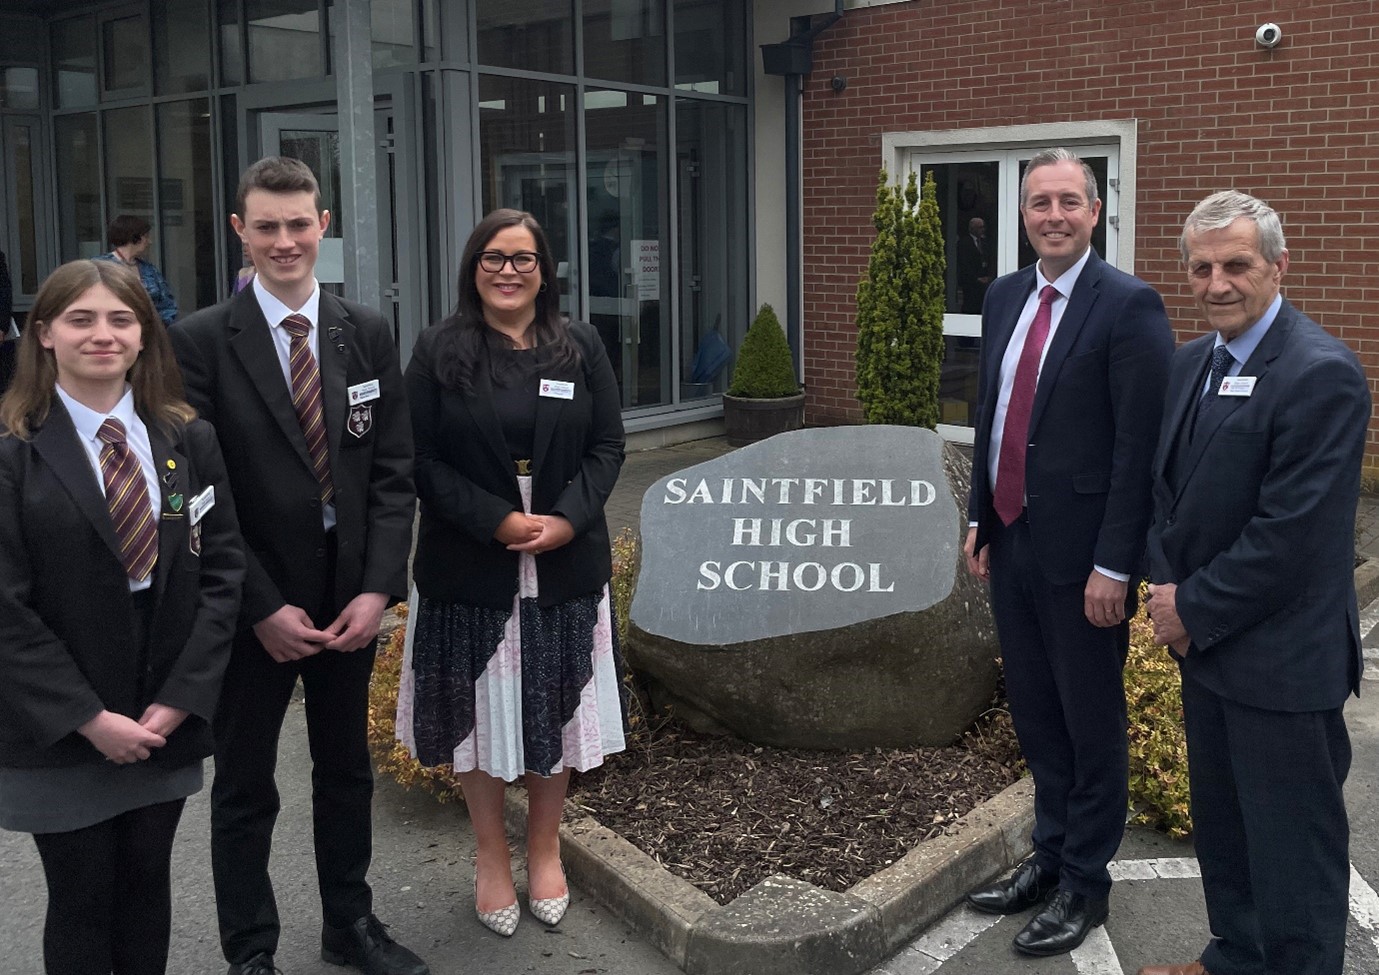 Education Minister Paul Givan visits Saintfield High School Featured Image